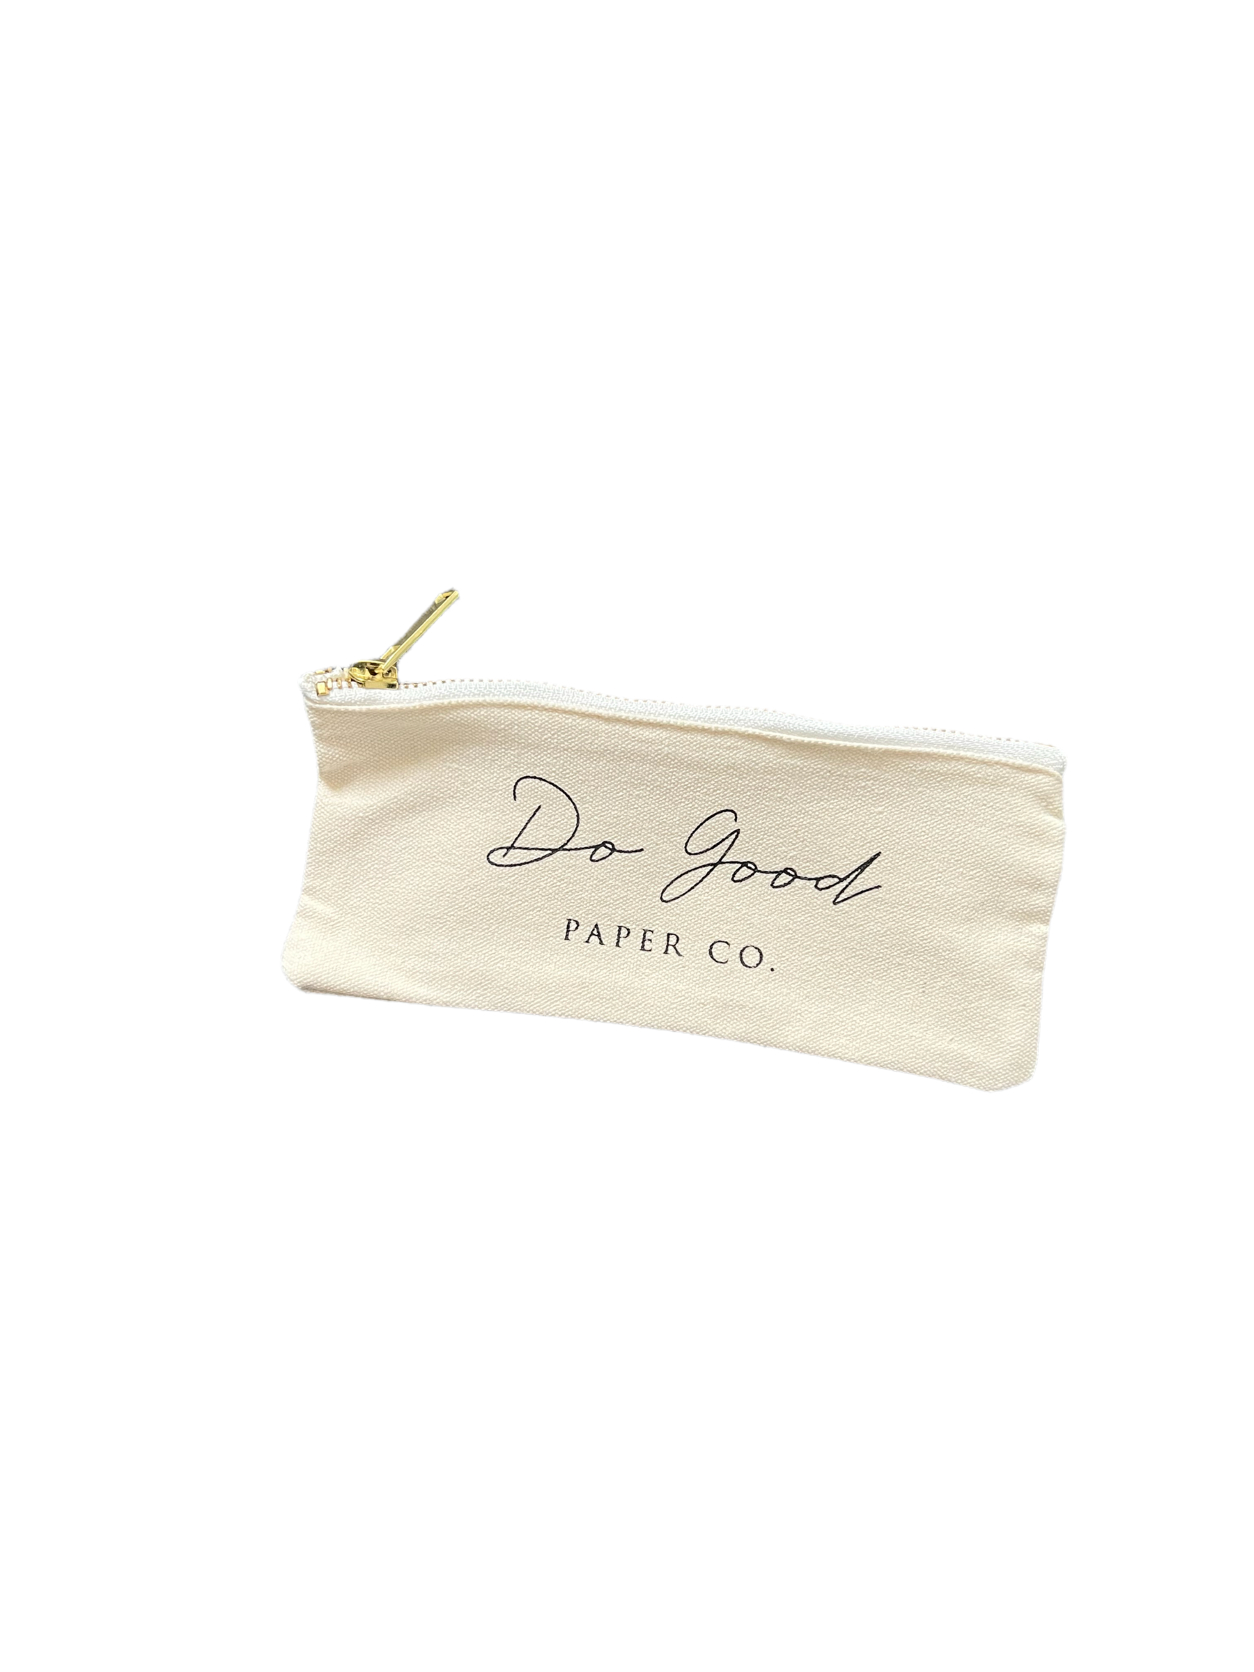 Canvas branded pencil case for pens and other stationery